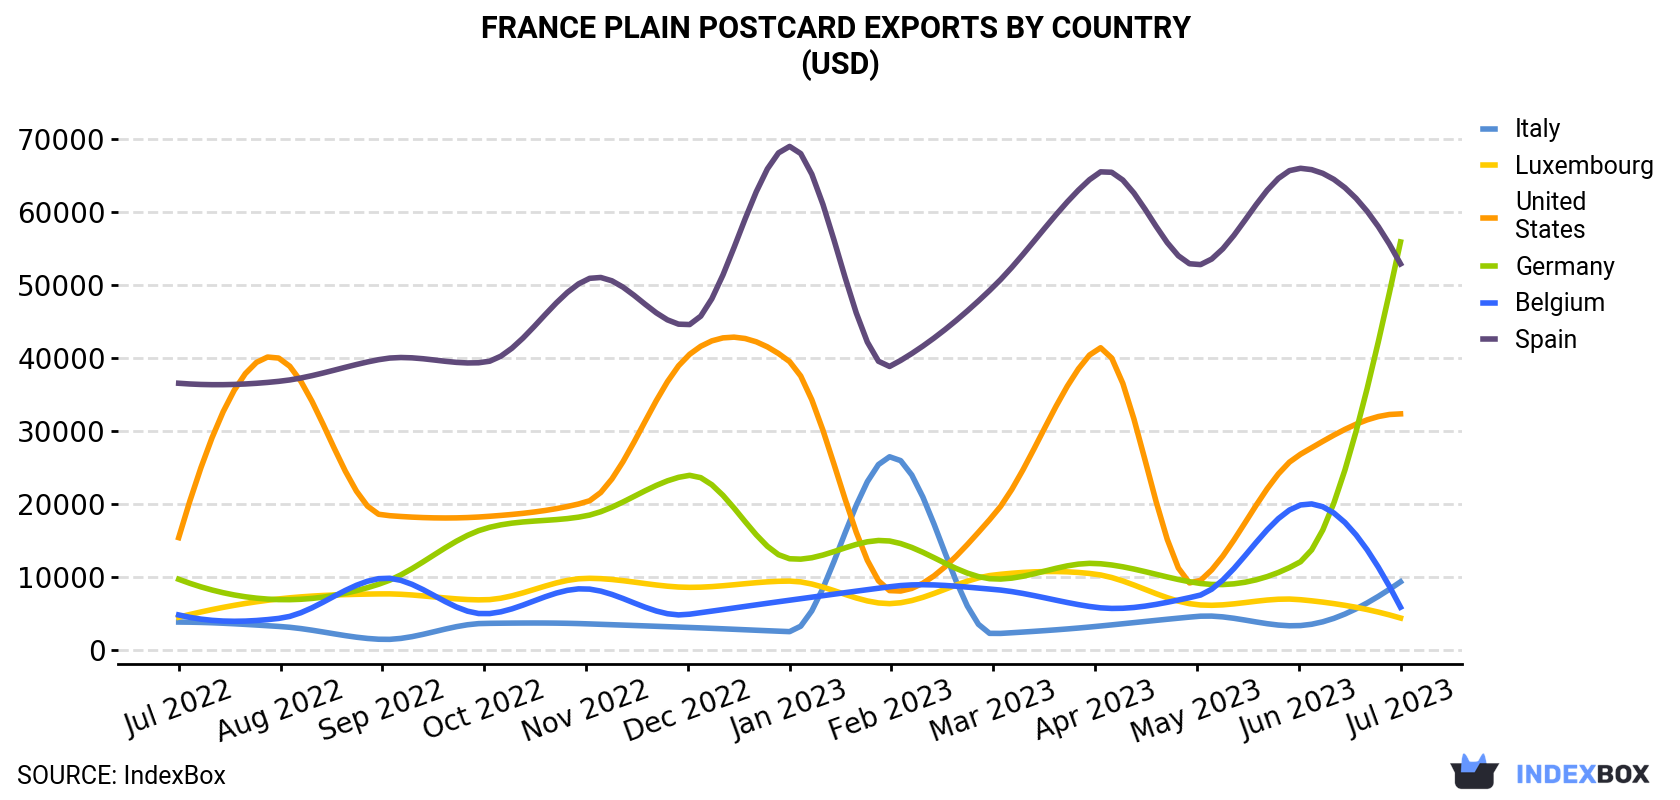 France Plain Postcard Exports By Country (USD)